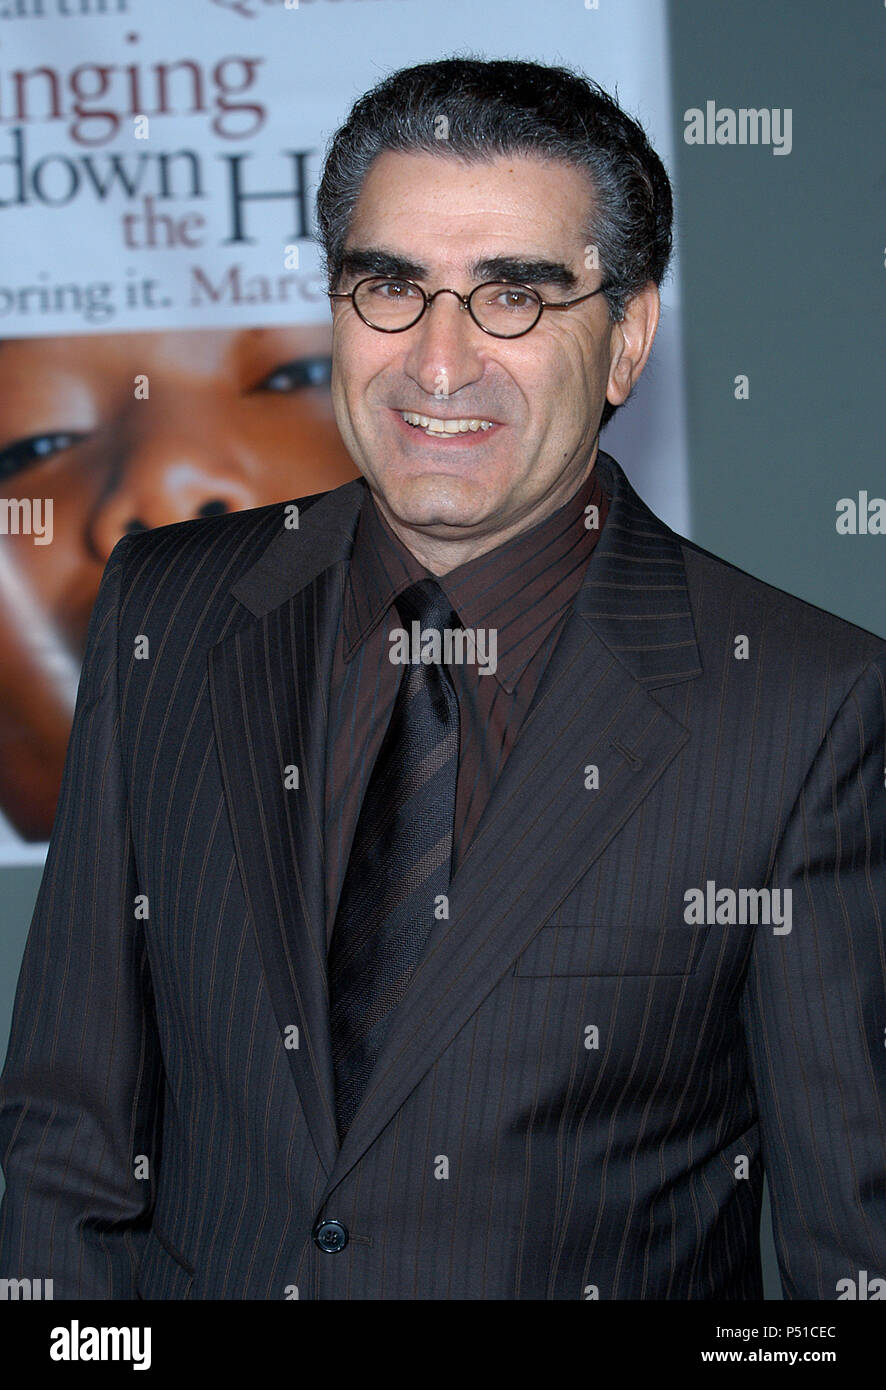 Eugene levy bringing down house hi-res stock photography and images - Alamy